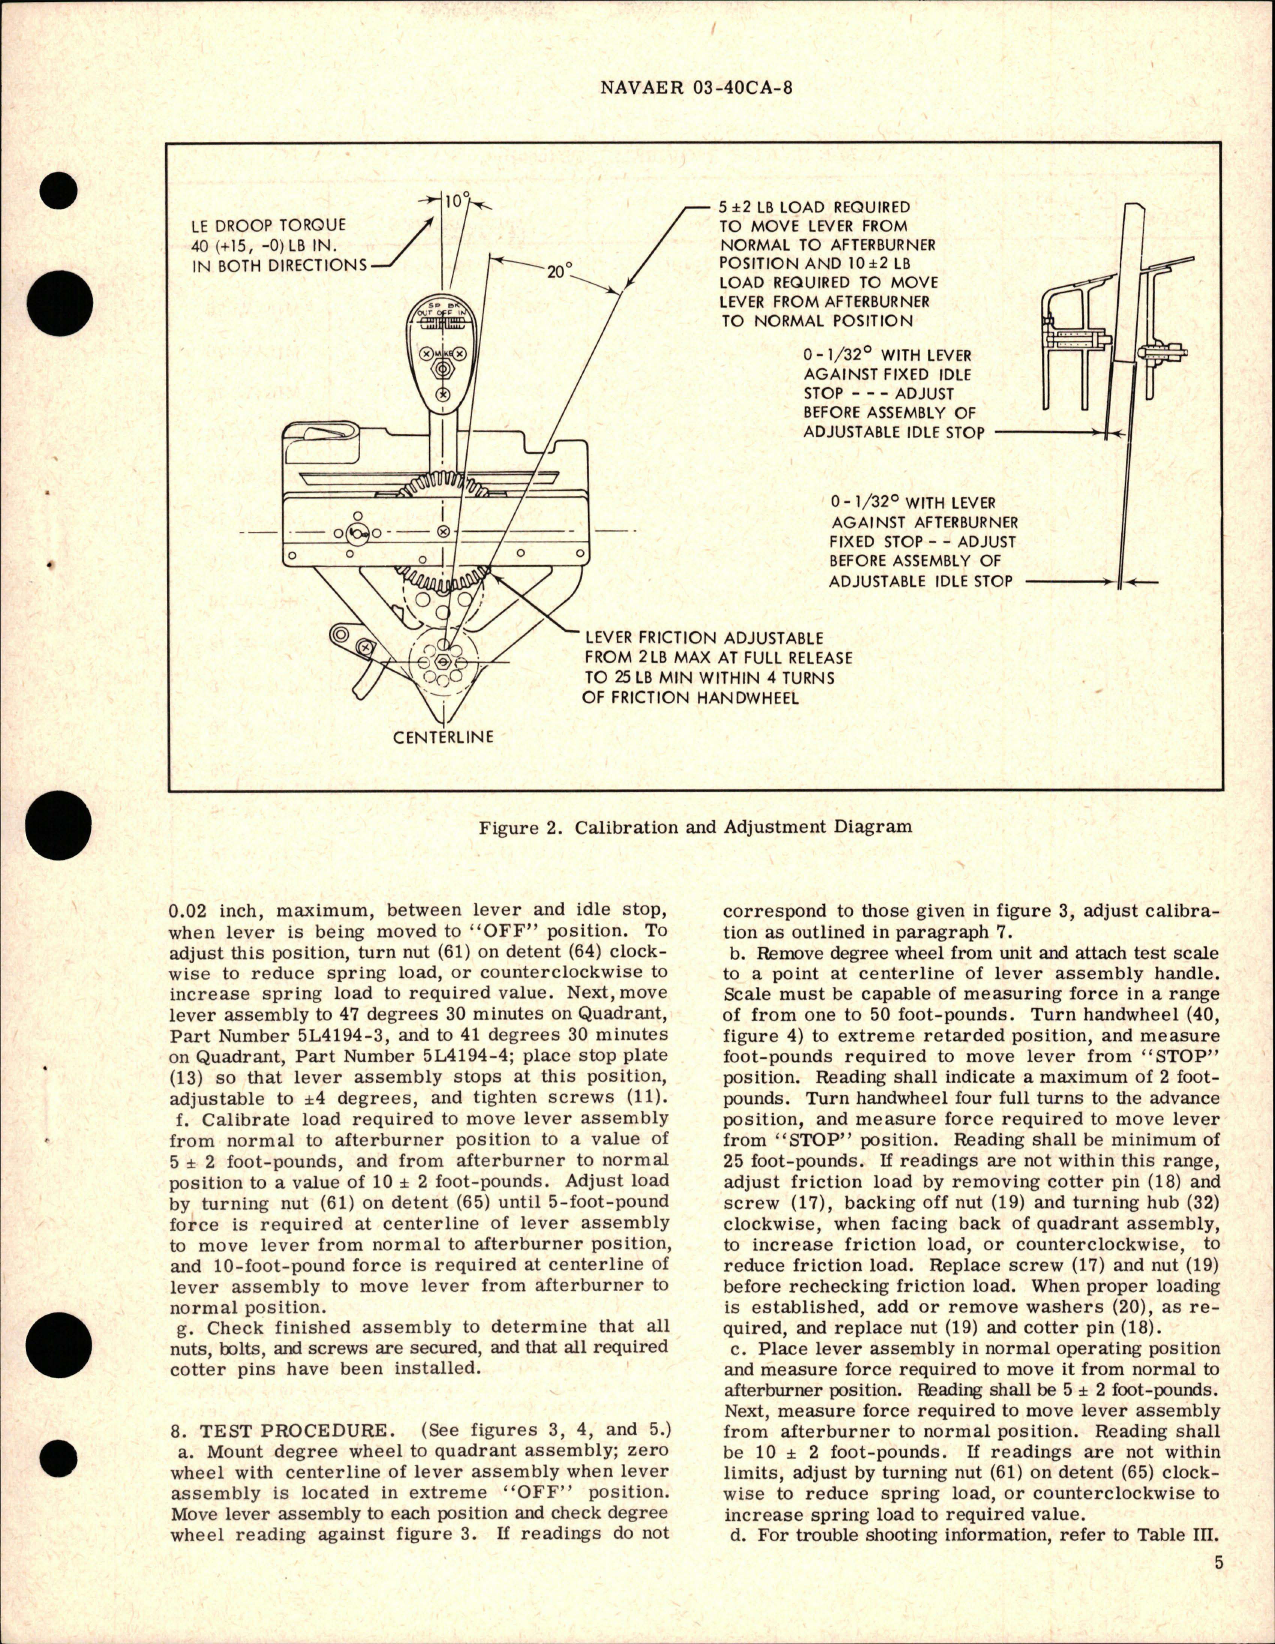 Sample page 7 from AirCorps Library document: Overhaul Instructions with Parts Breakdown for Engine Control Quadrant - Part 5L4194-3 and 5L4194-4